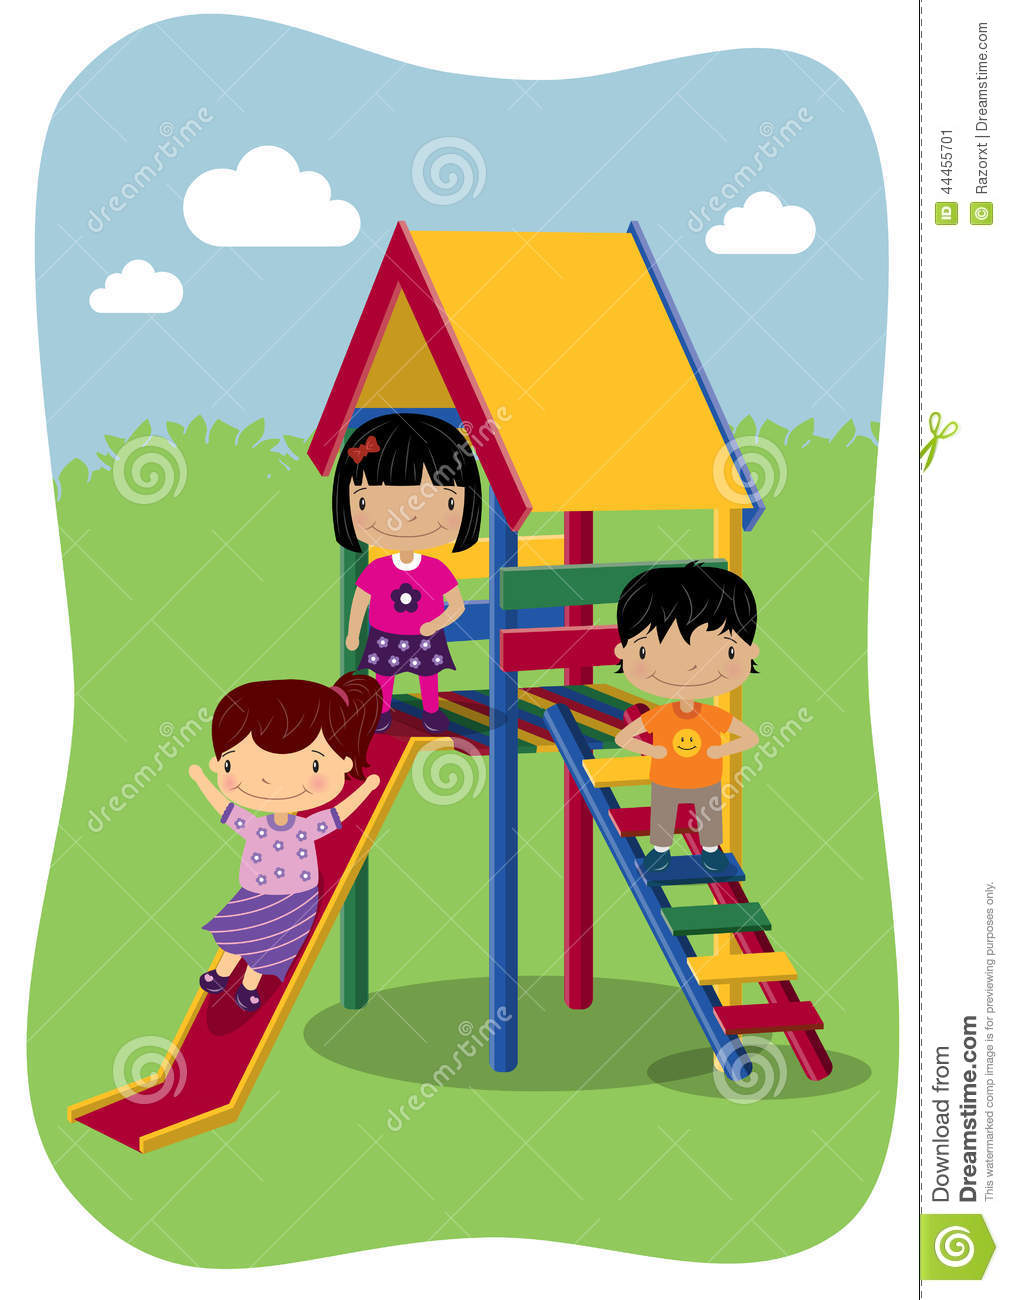 Outdoor Play Clipart.